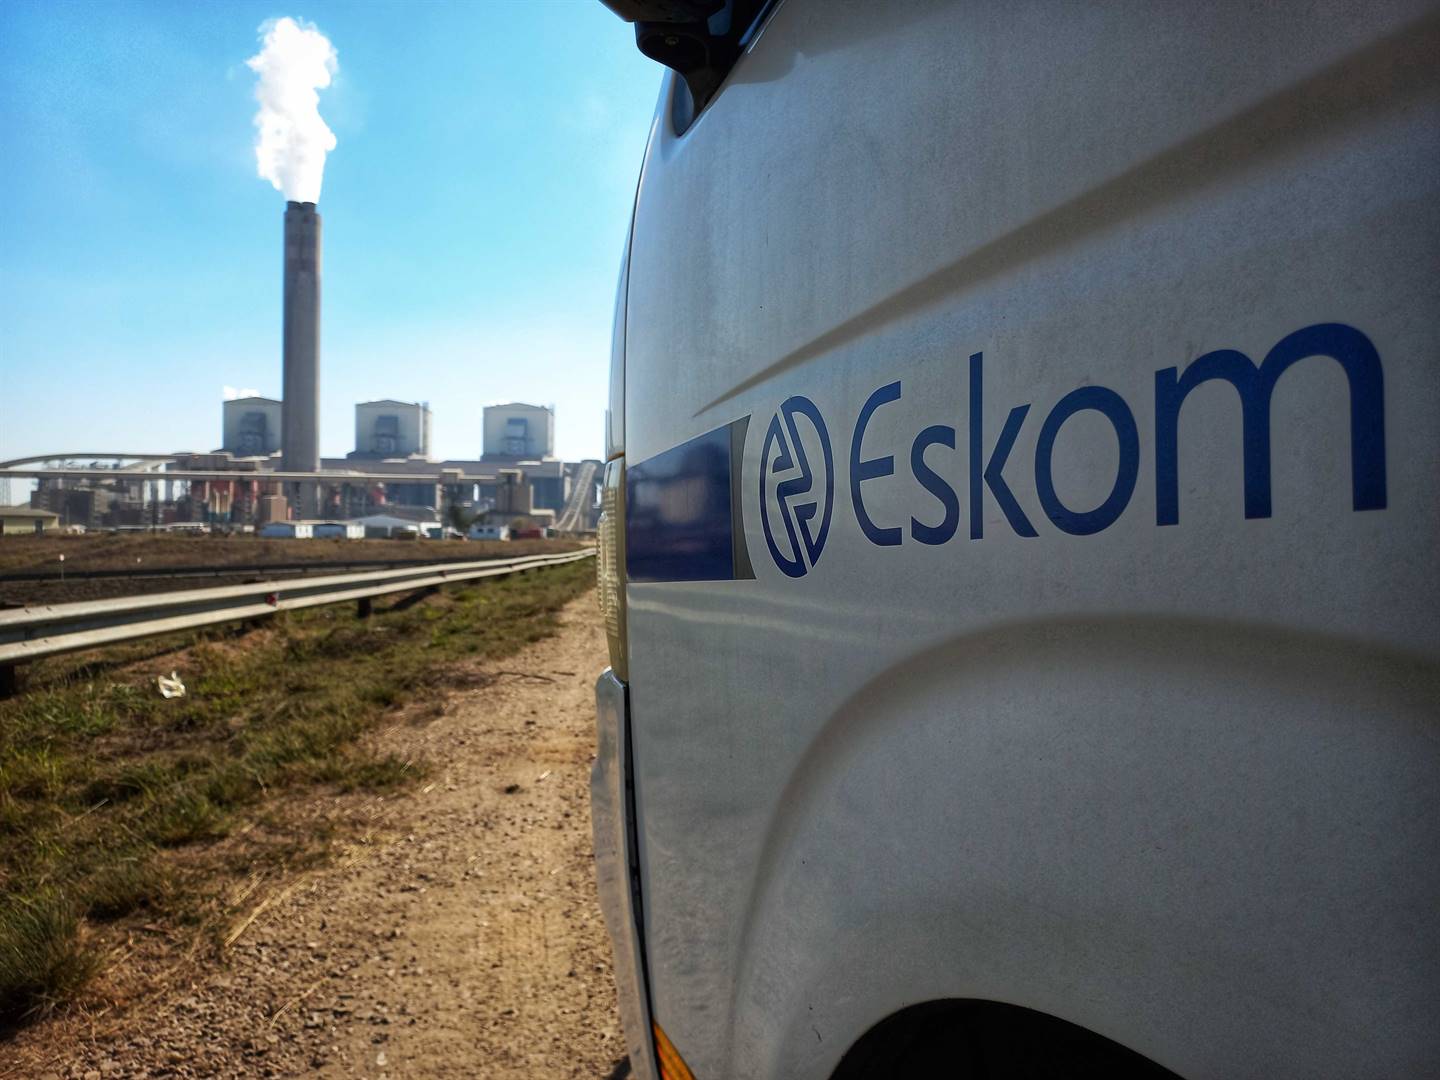 To save South Africa's economy, we cannot rely on Eskom, the government or the ANC argues the writer. Photo: William Horne